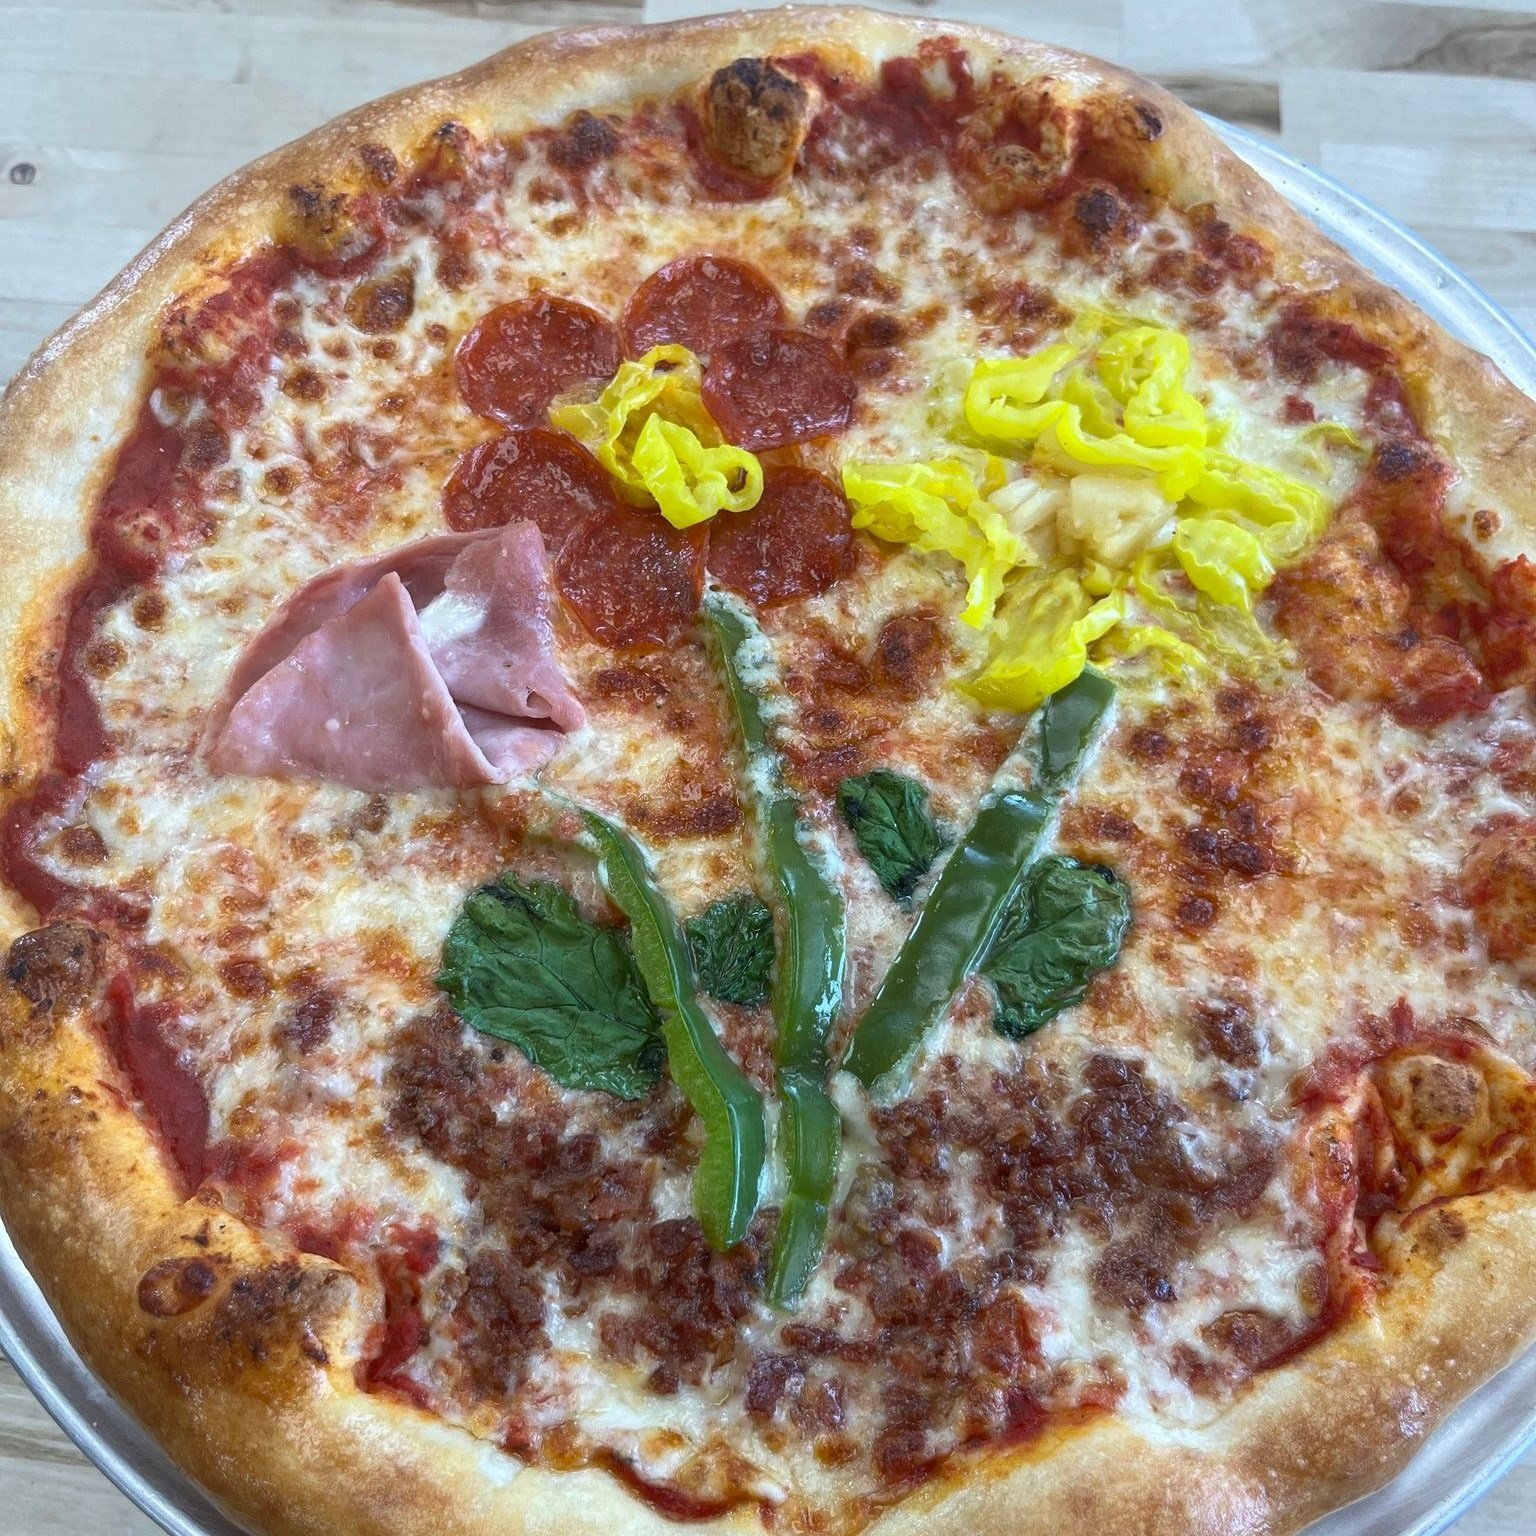 Who ever said mother's day flowers couldn't come in pizza form?🌷🌸🌺

Happy Mother's Day to the moms of Pizza Cutter! We love you!! ❤️

#mothersday #happymothersday #northvillemichigan #pizza #northvillemi #supportlocal #artisticpizza